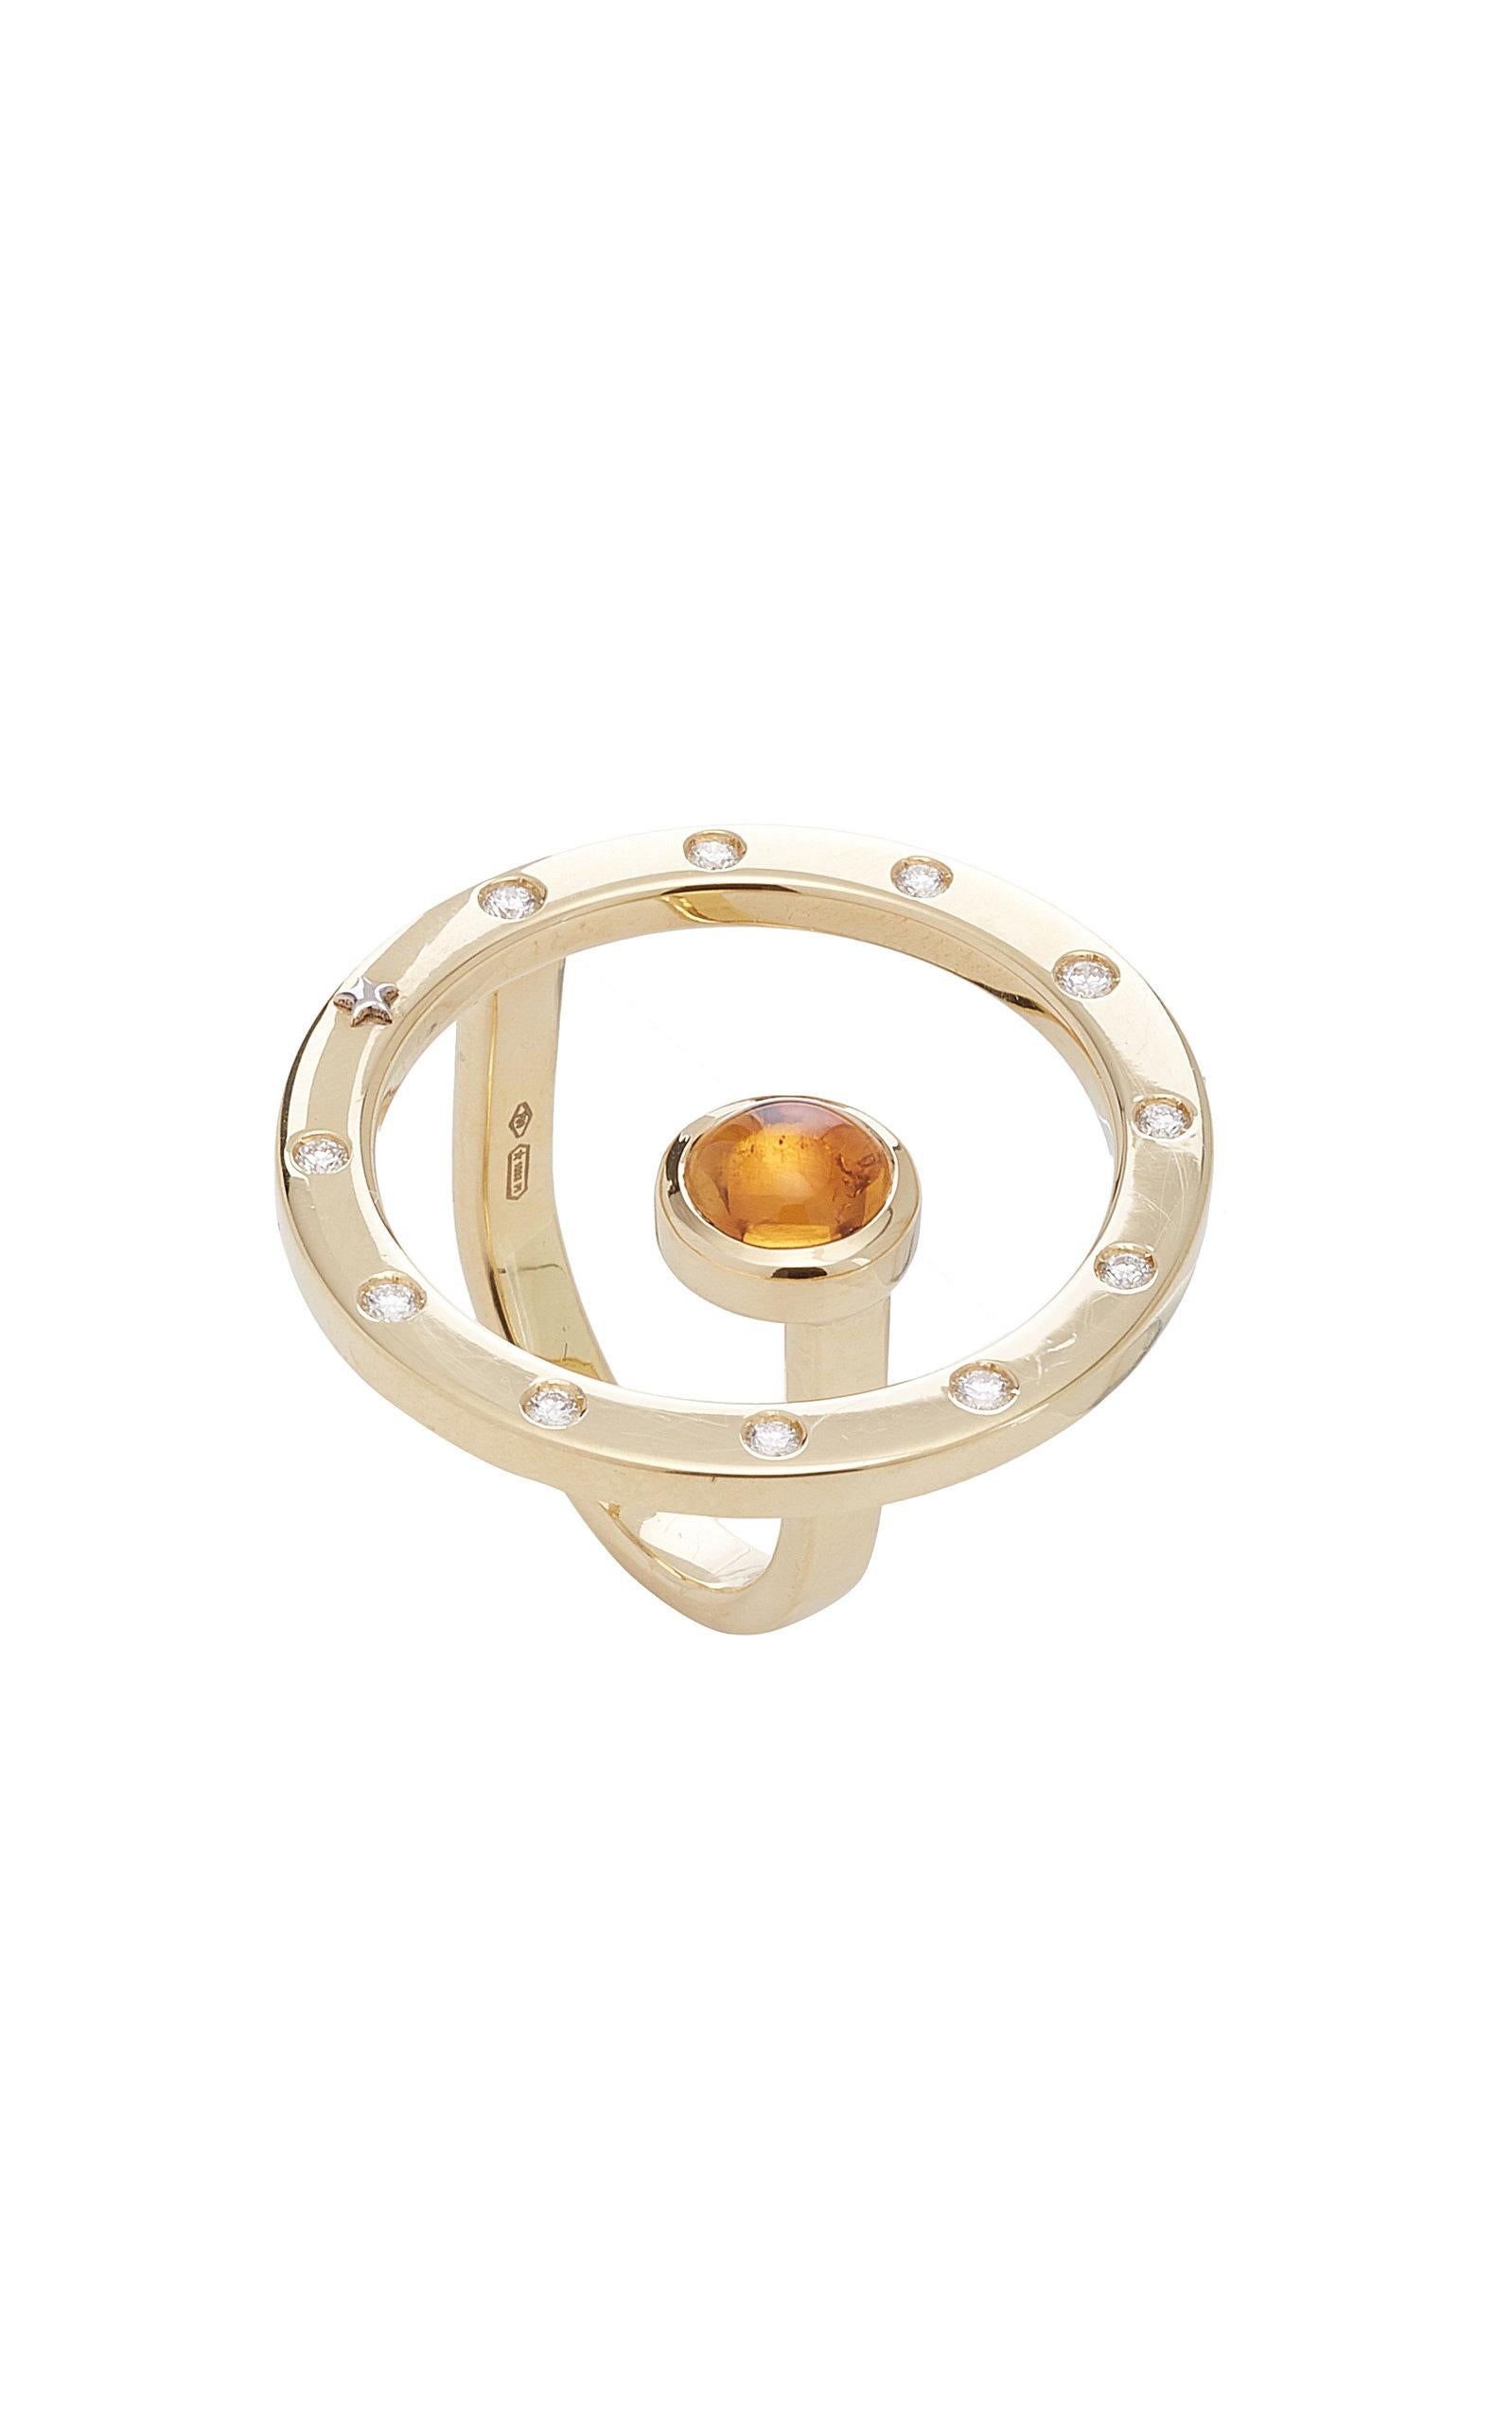 Inspired by the concept of time, Anna Maccieri Rossi's 'ORA Ring' features a circular silhouette with natural citrine quartz cabochon at center. The hours of the day are marked by the 11 white diamonds and star at 8 o'clock around the rim.
PRODUCT